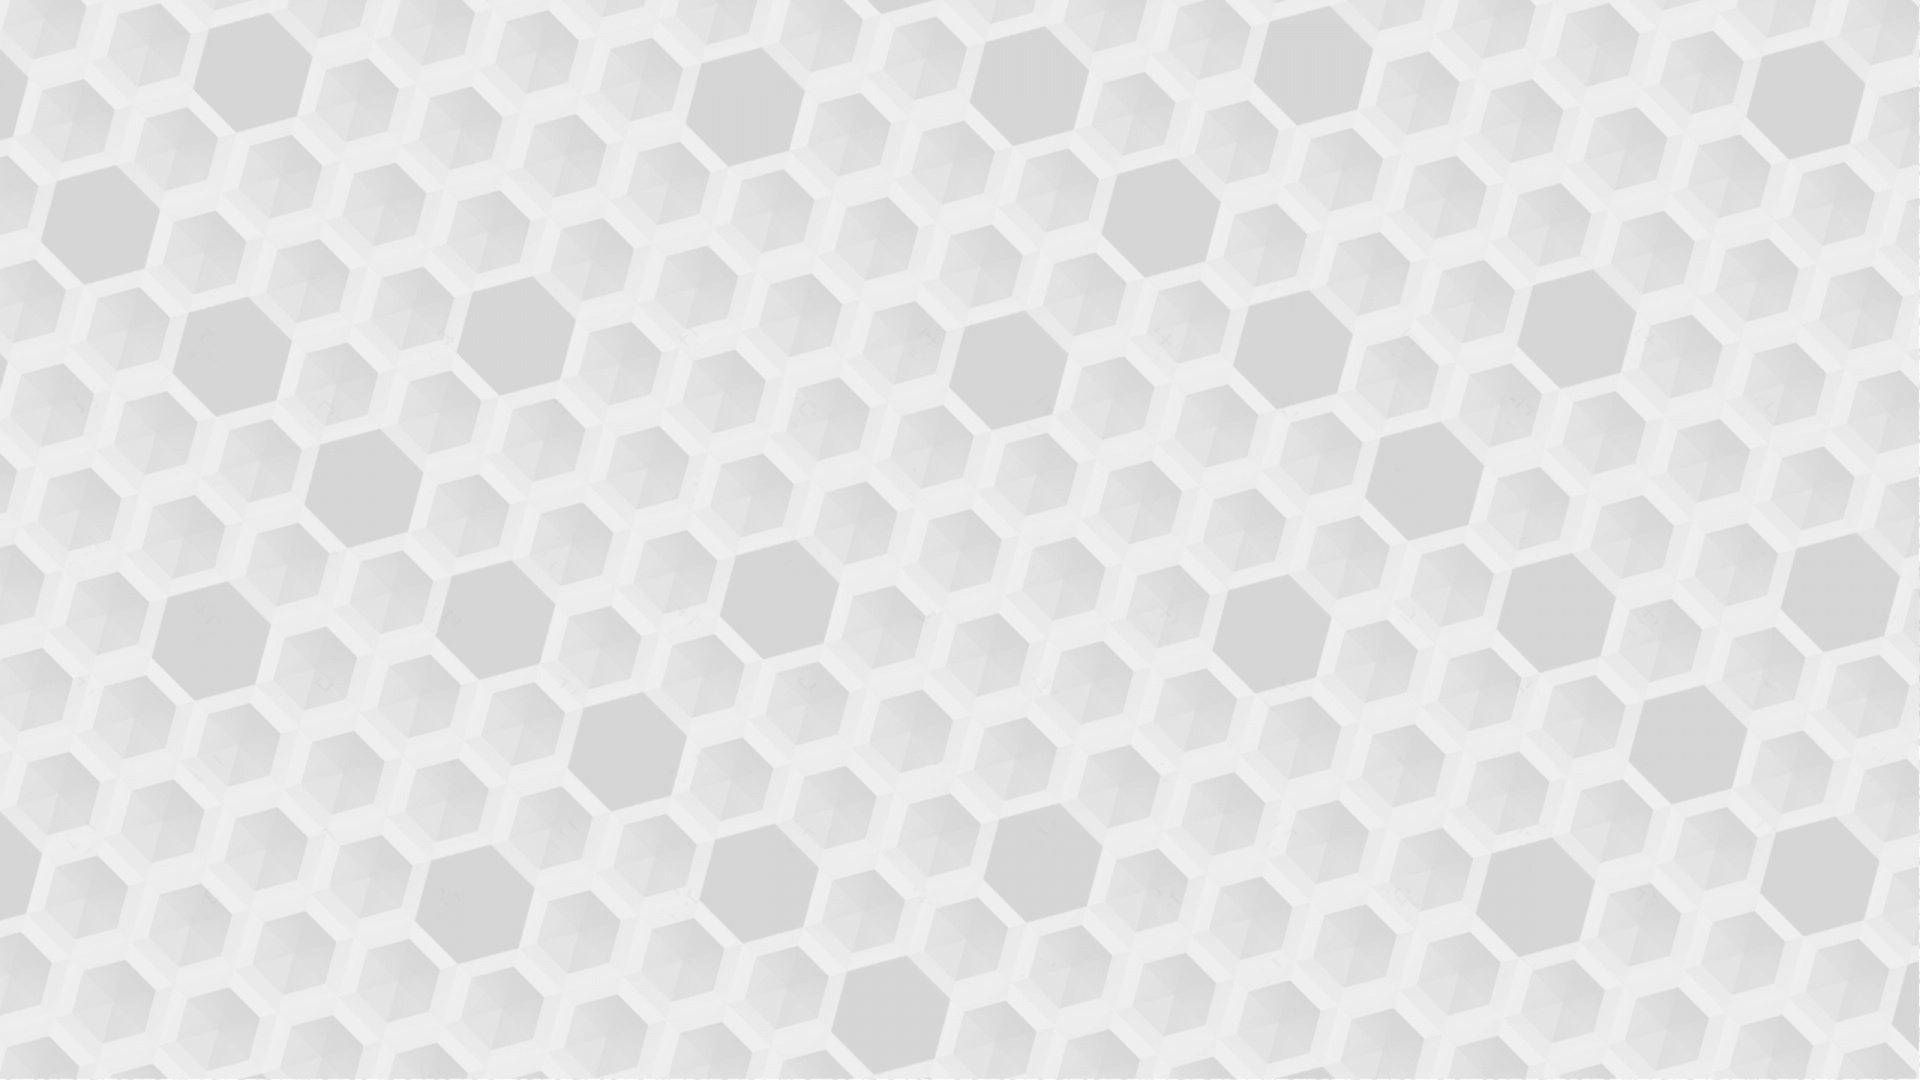 White and Black Checkered Textile. Wallpaper in 1920x1080 Resolution